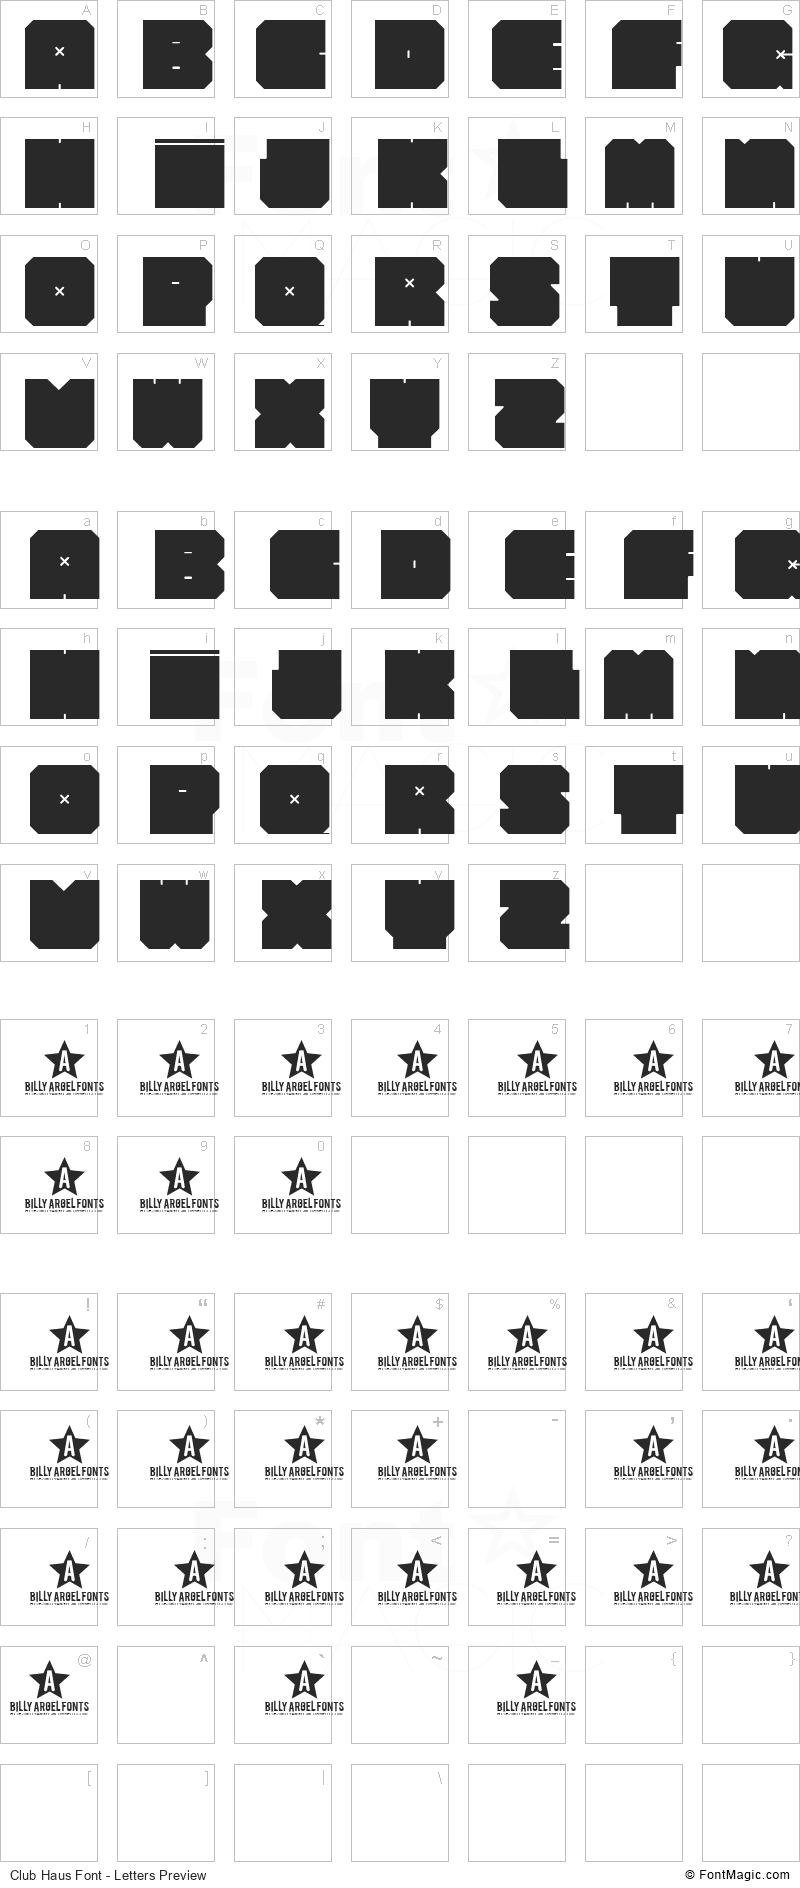 Club Haus Font - All Latters Preview Chart